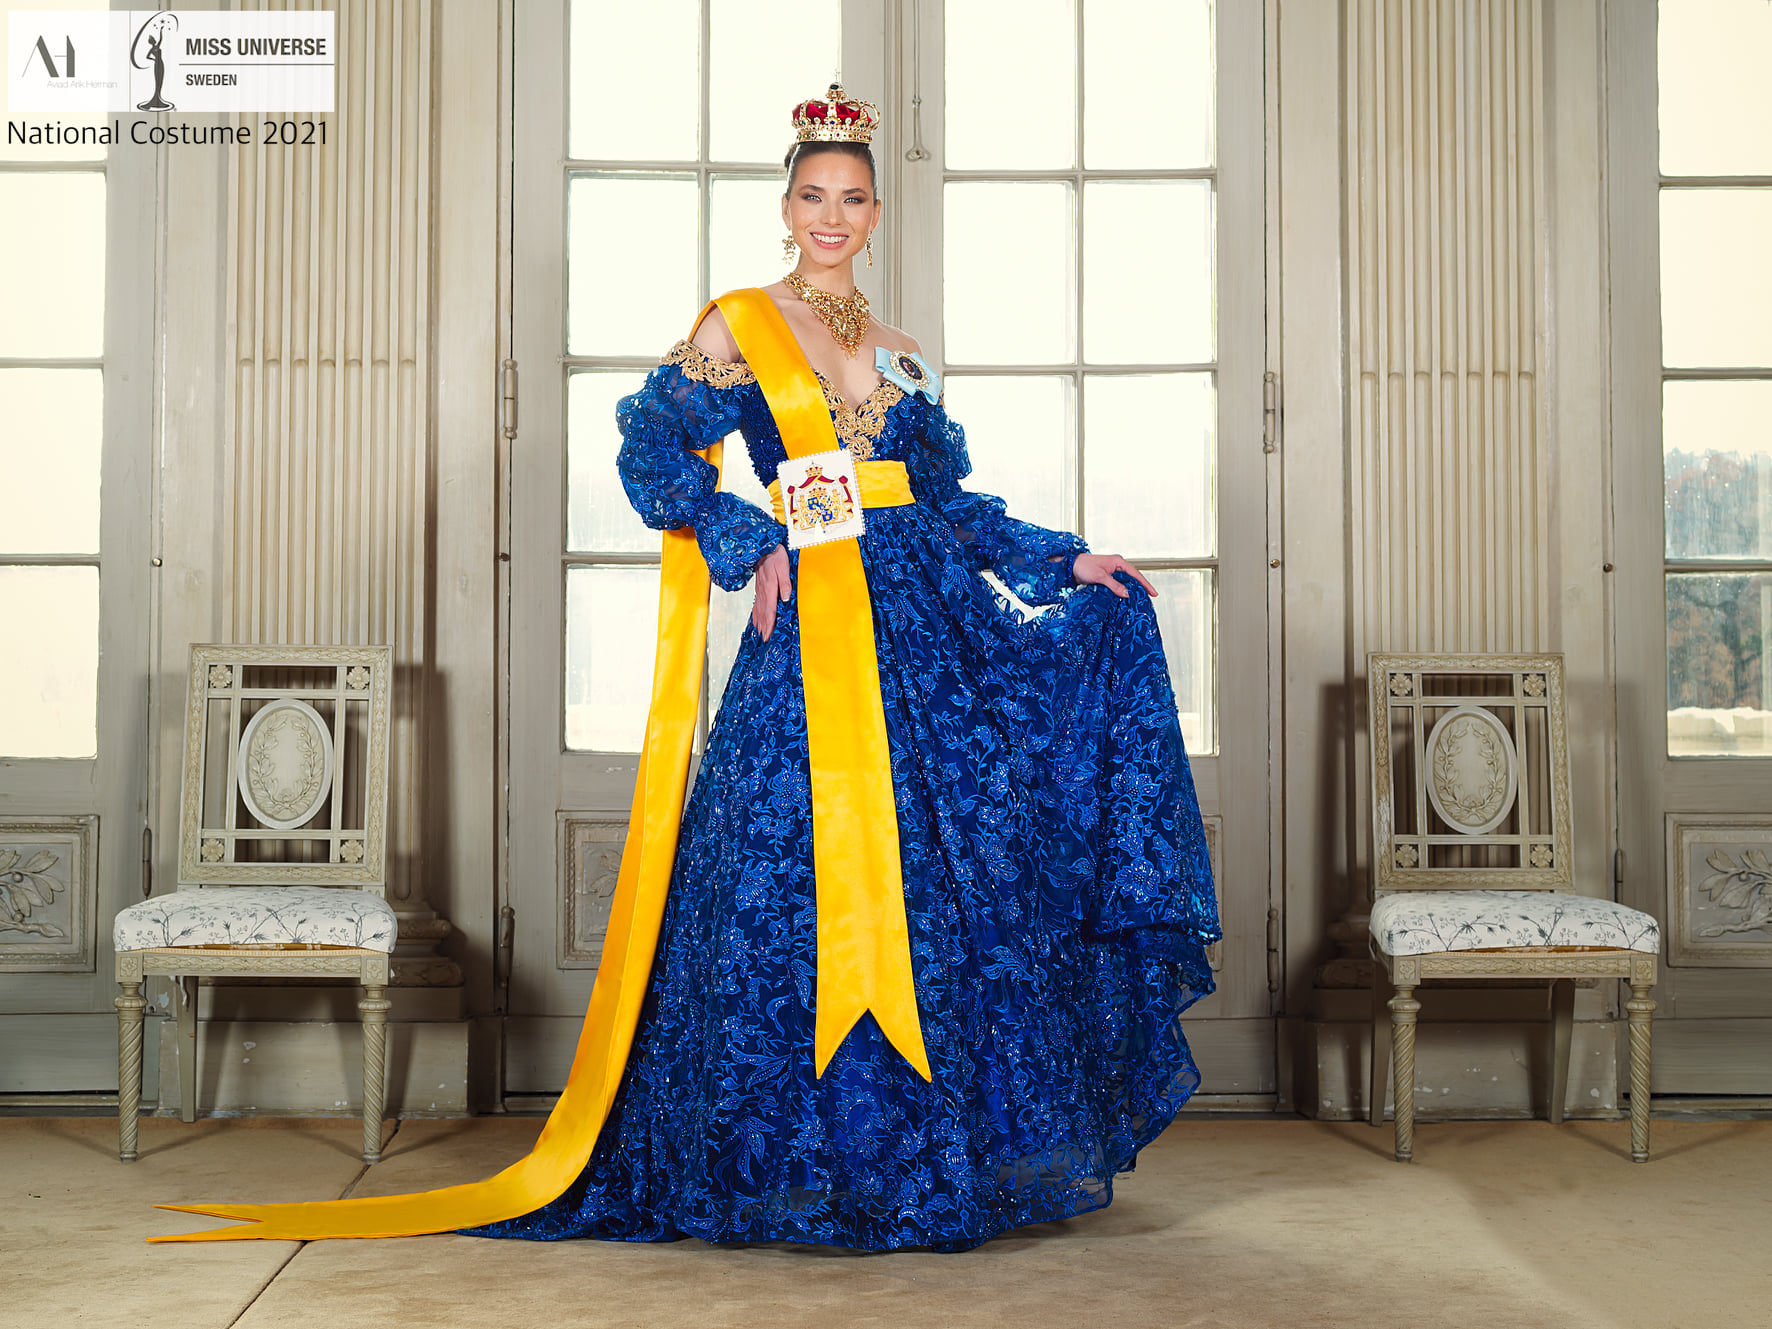 Humble Barber shop evening Sweden's Moa Sandberg reveals her national costume for the 70th Miss  Universe pageant